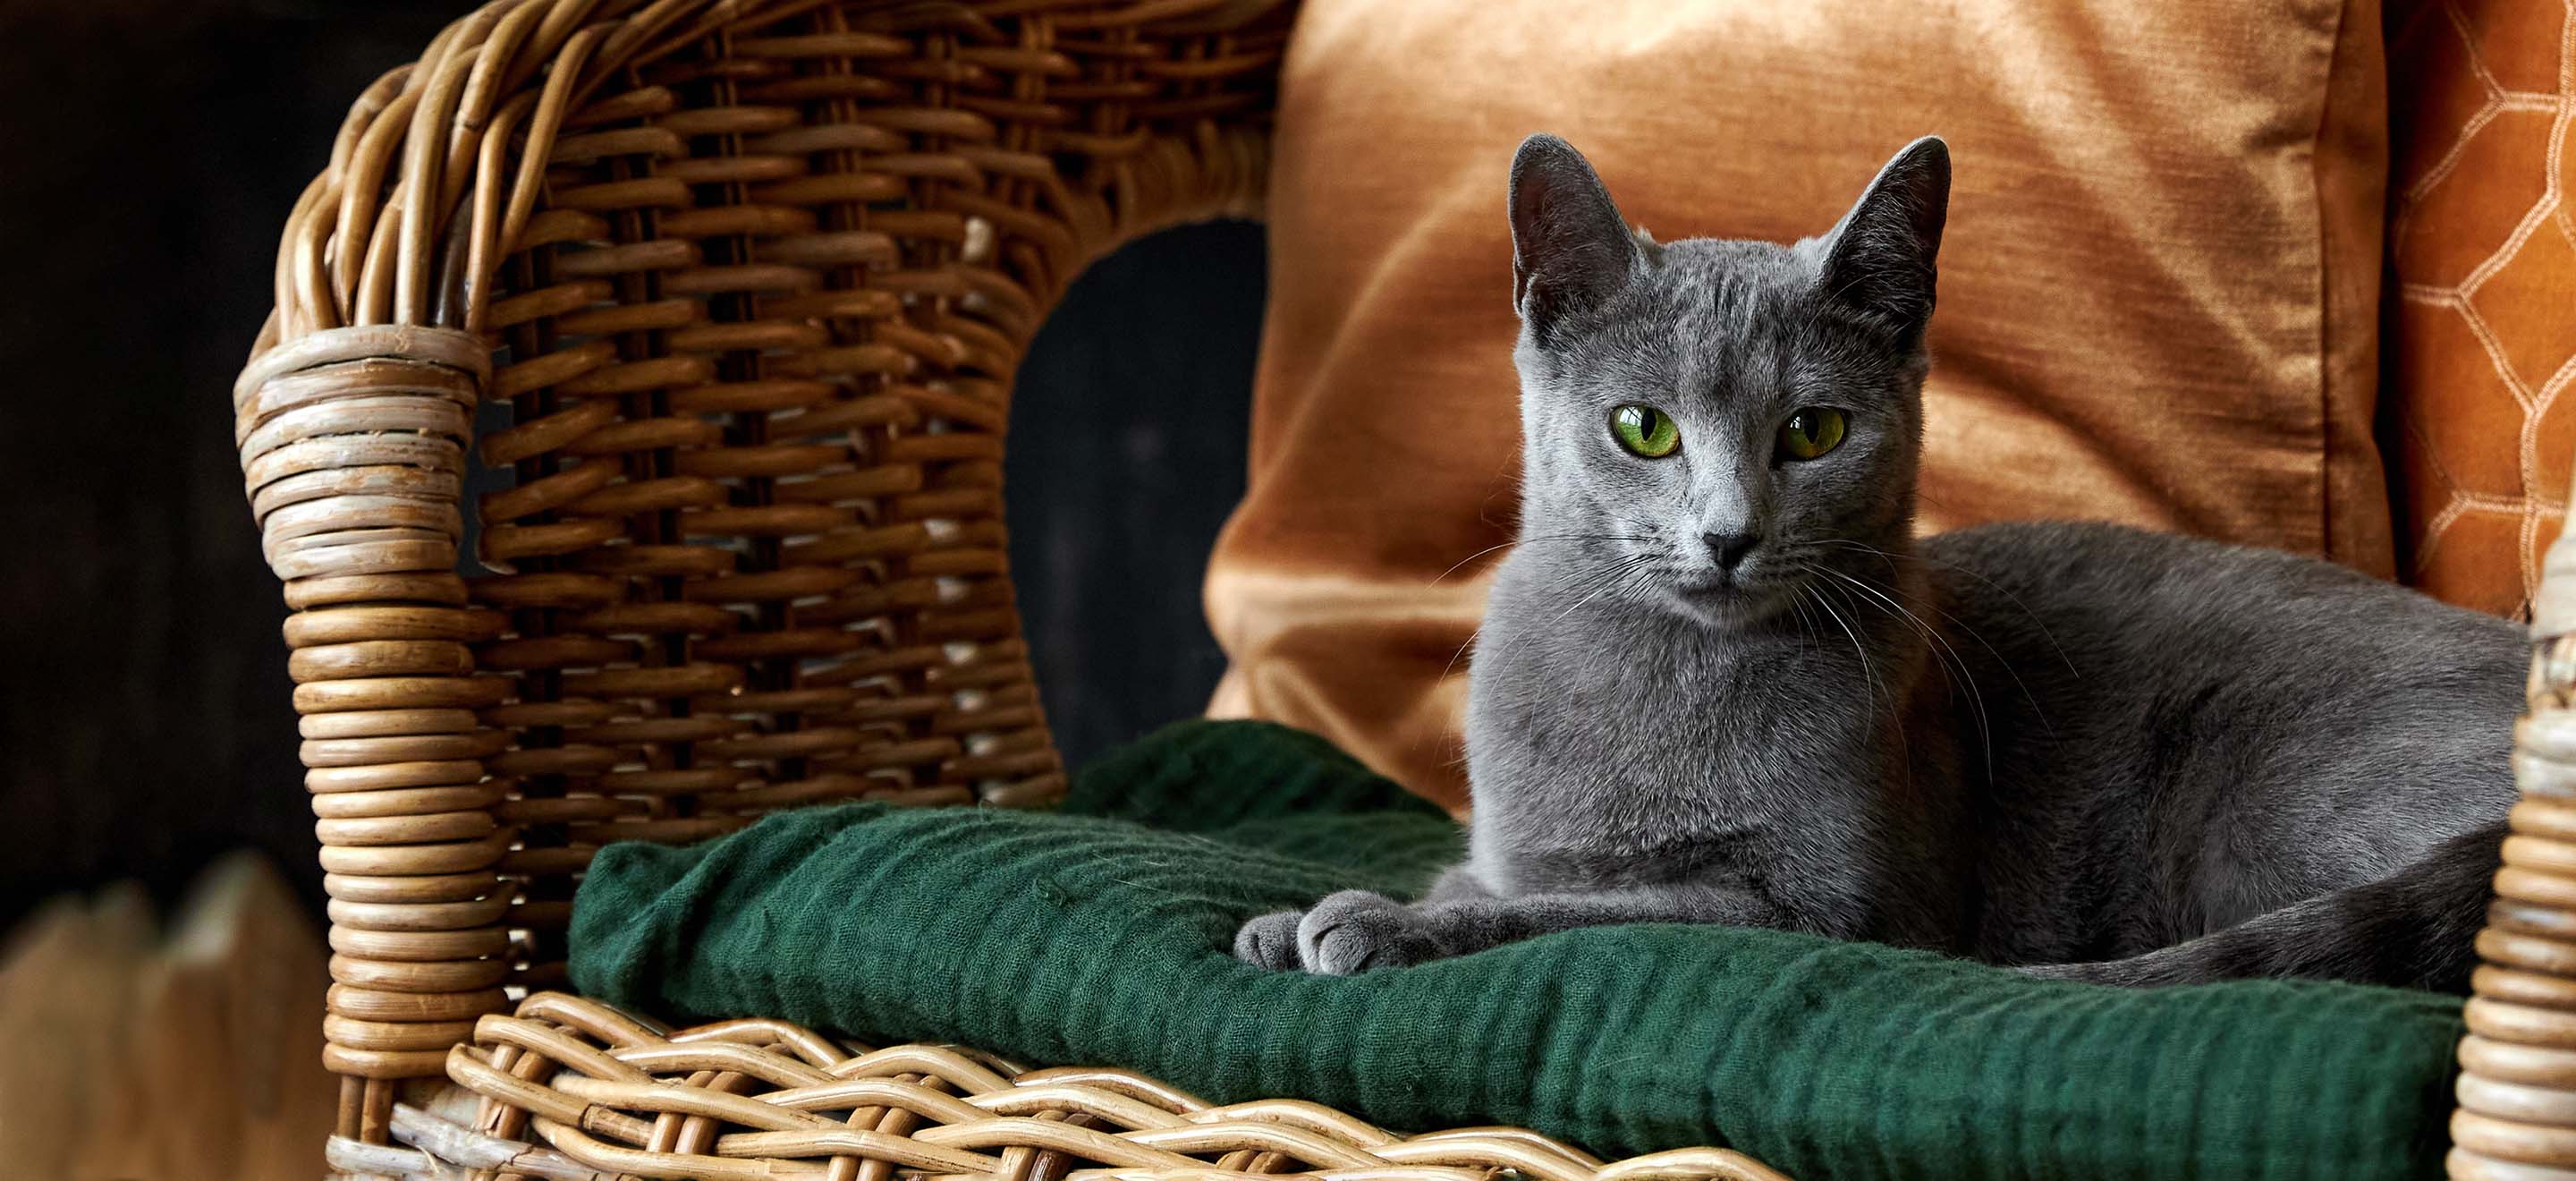 Russian Blue cat sitting in a wicker chair and looking at the camera image